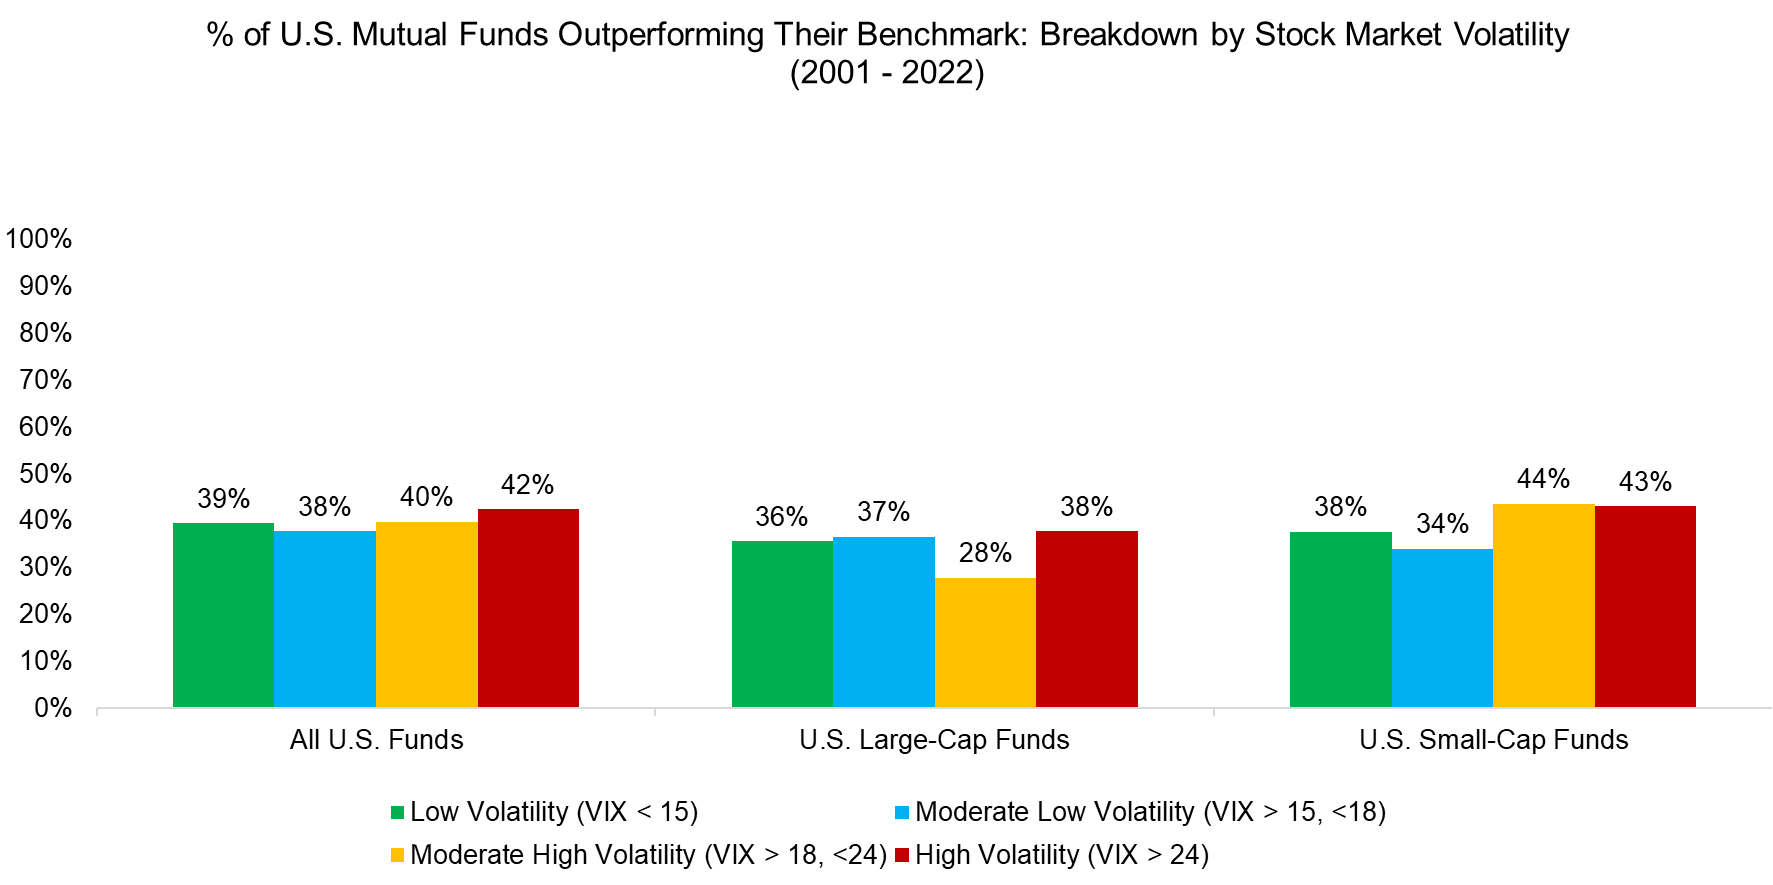 % of U.S. Mutual Funds Outperforming Their Benchmark Breakdown by Stock Market Volatility (2001 - 2022)